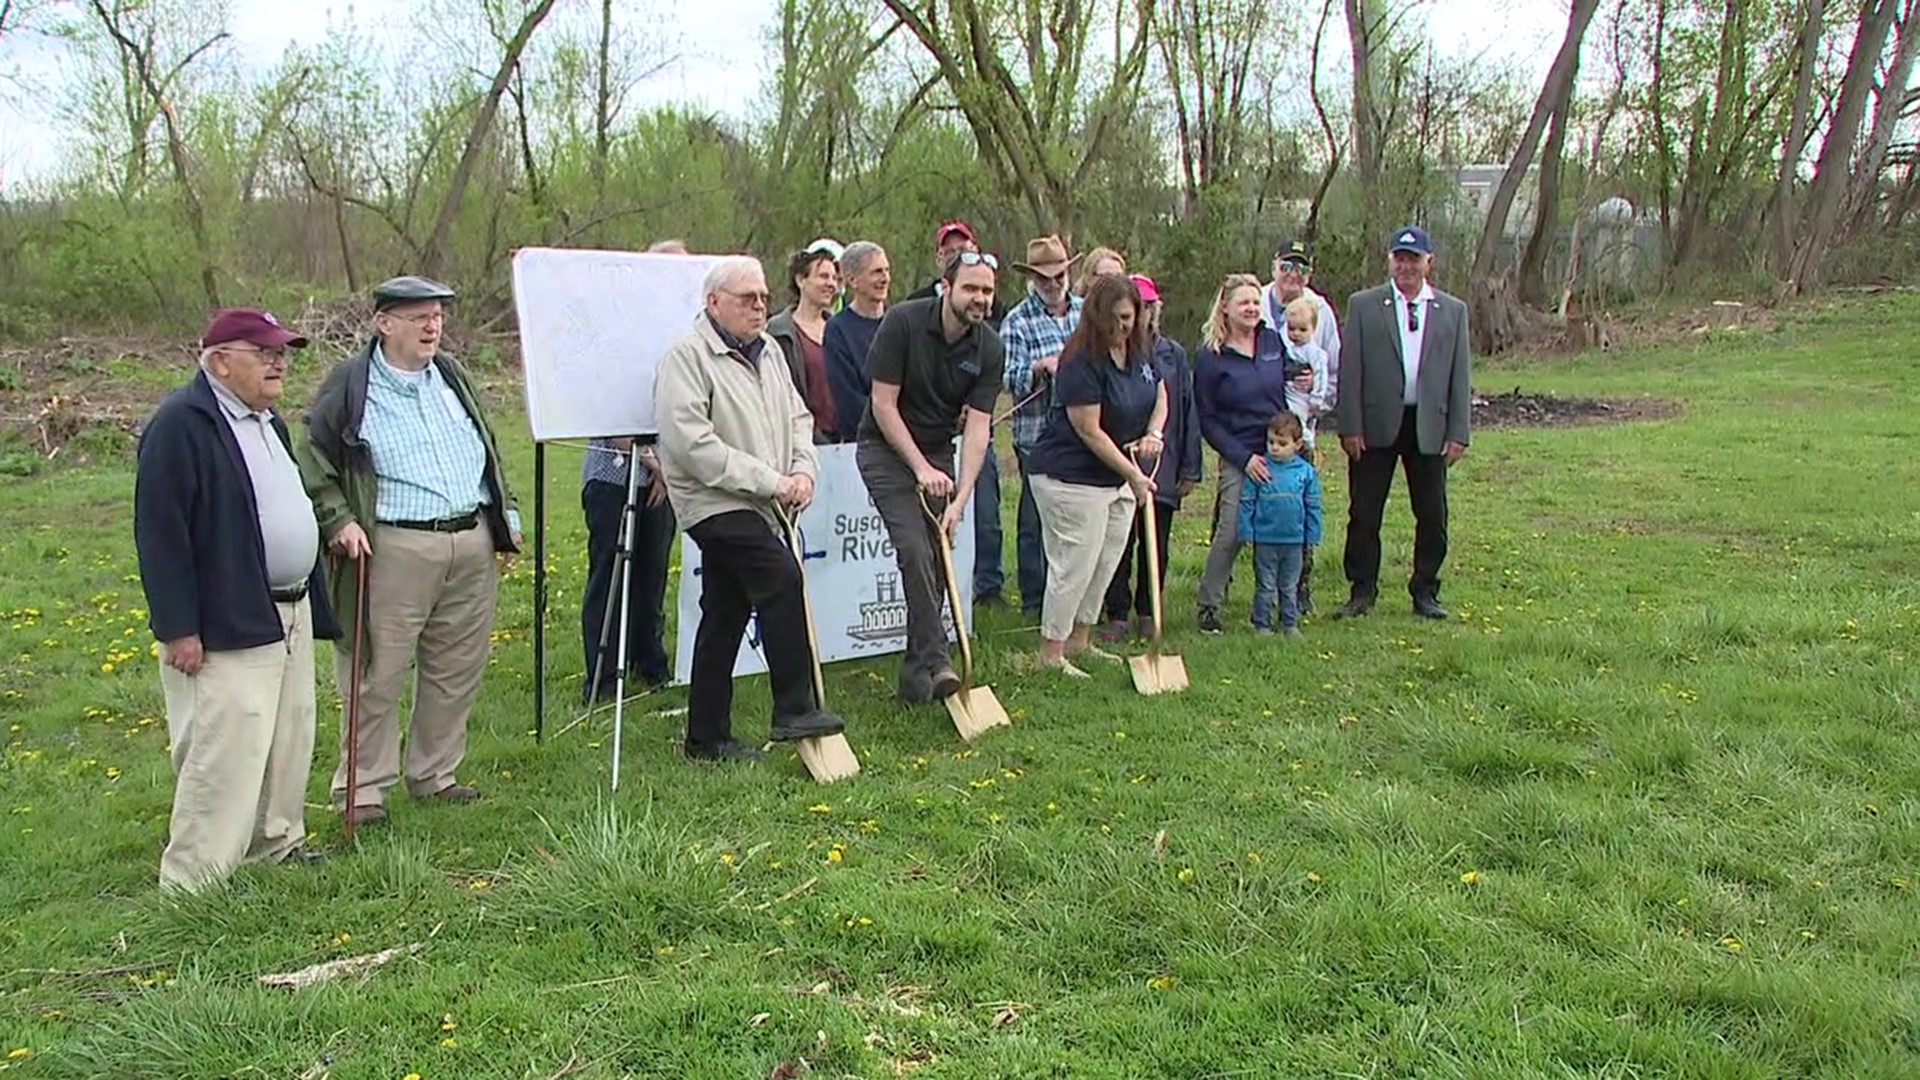 Ground was broken Wednesday at the site of the Central Susquehanna Riverboat.